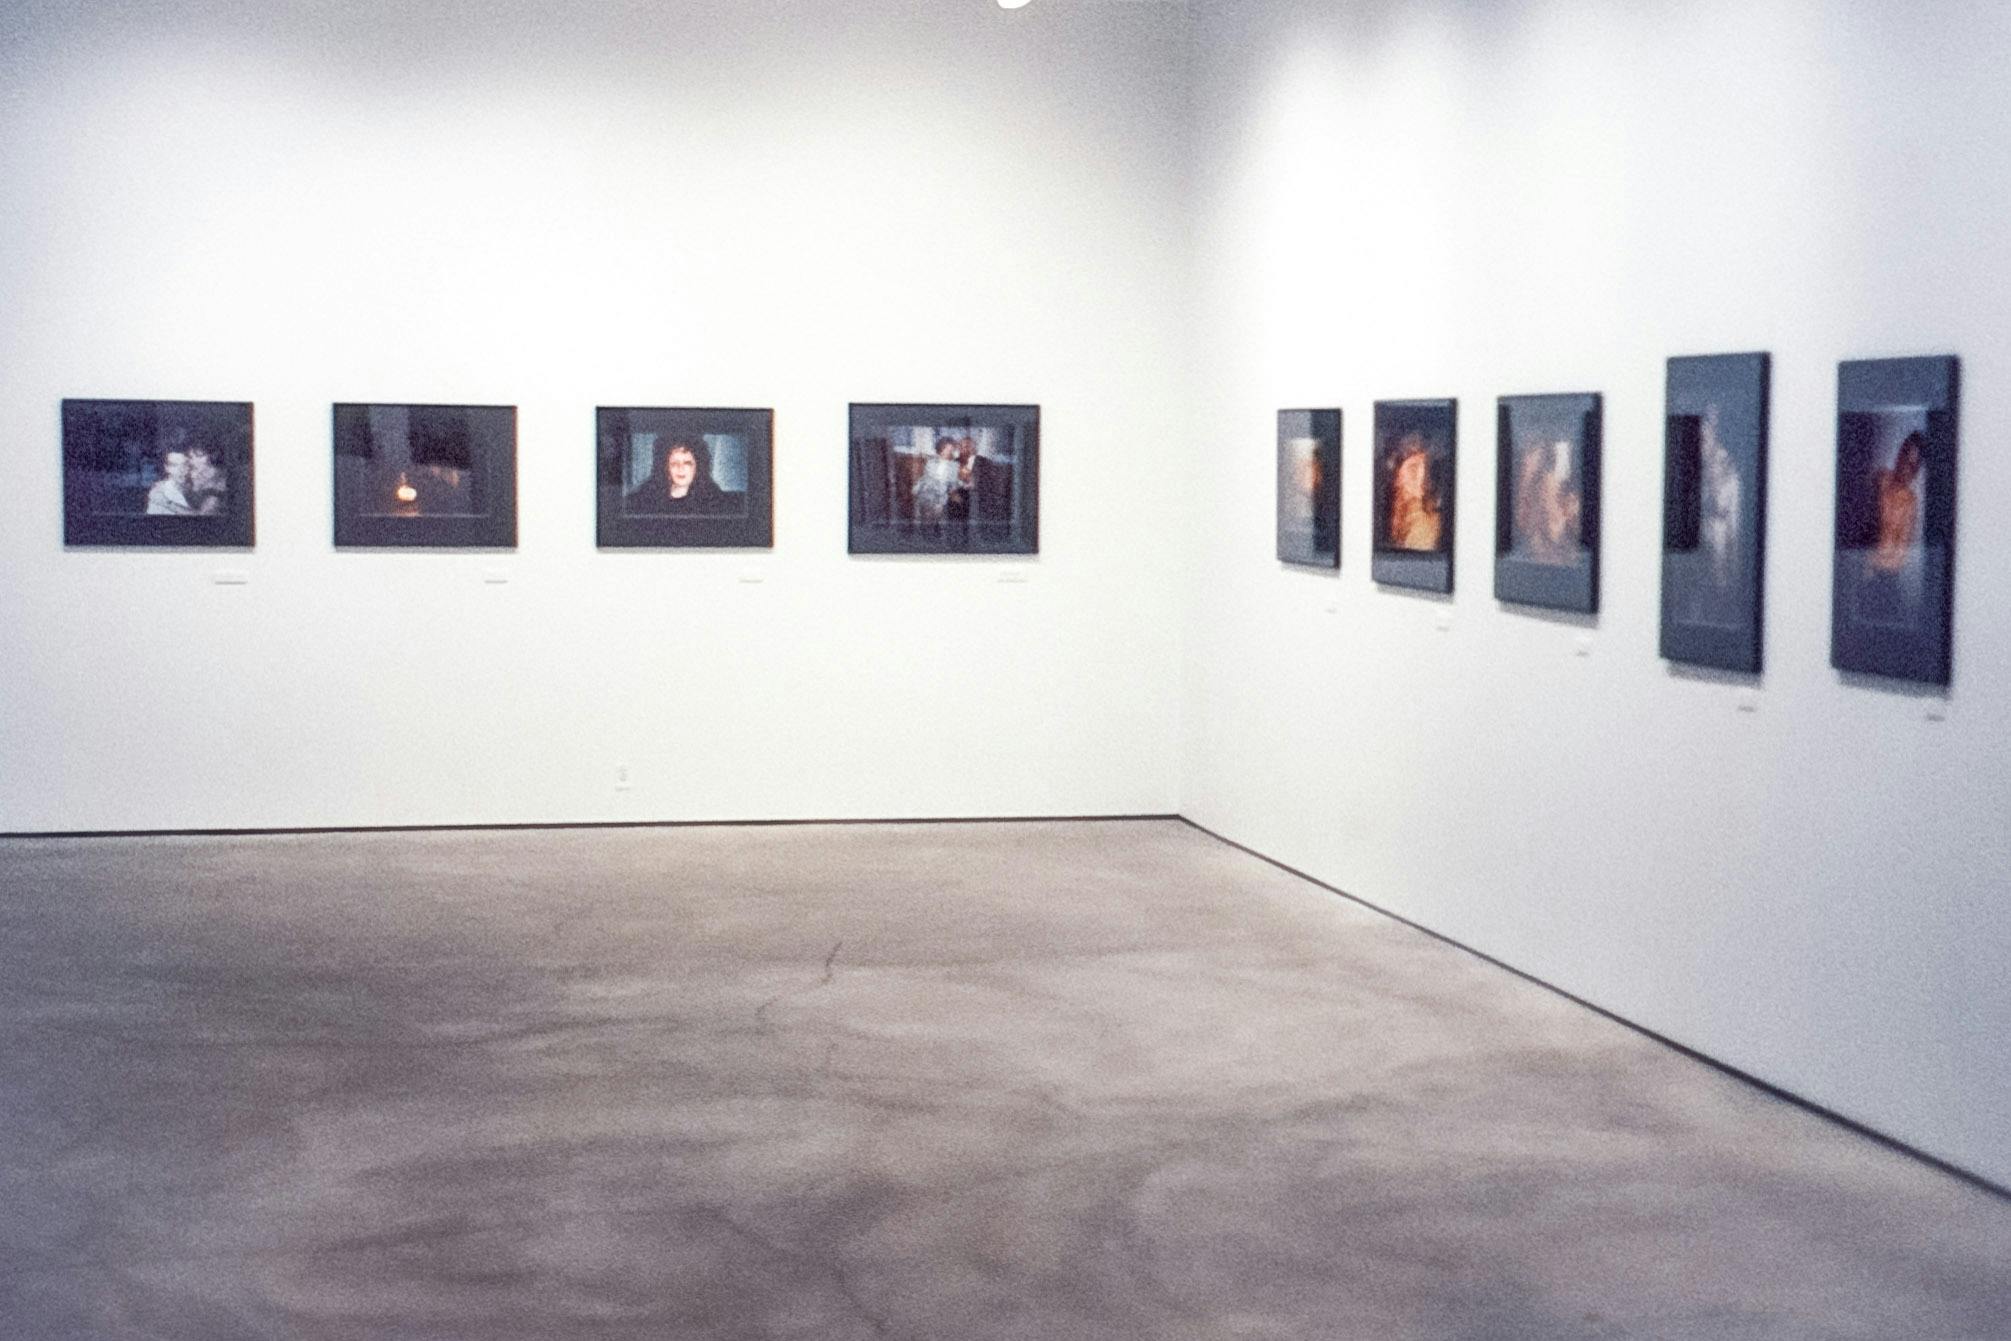 The corner of a gallery space. Mounted on the white walls are photo works in black frames . The photos are of people in dark rooms. Some are embracing, some are dressed, and some are half-dressed.